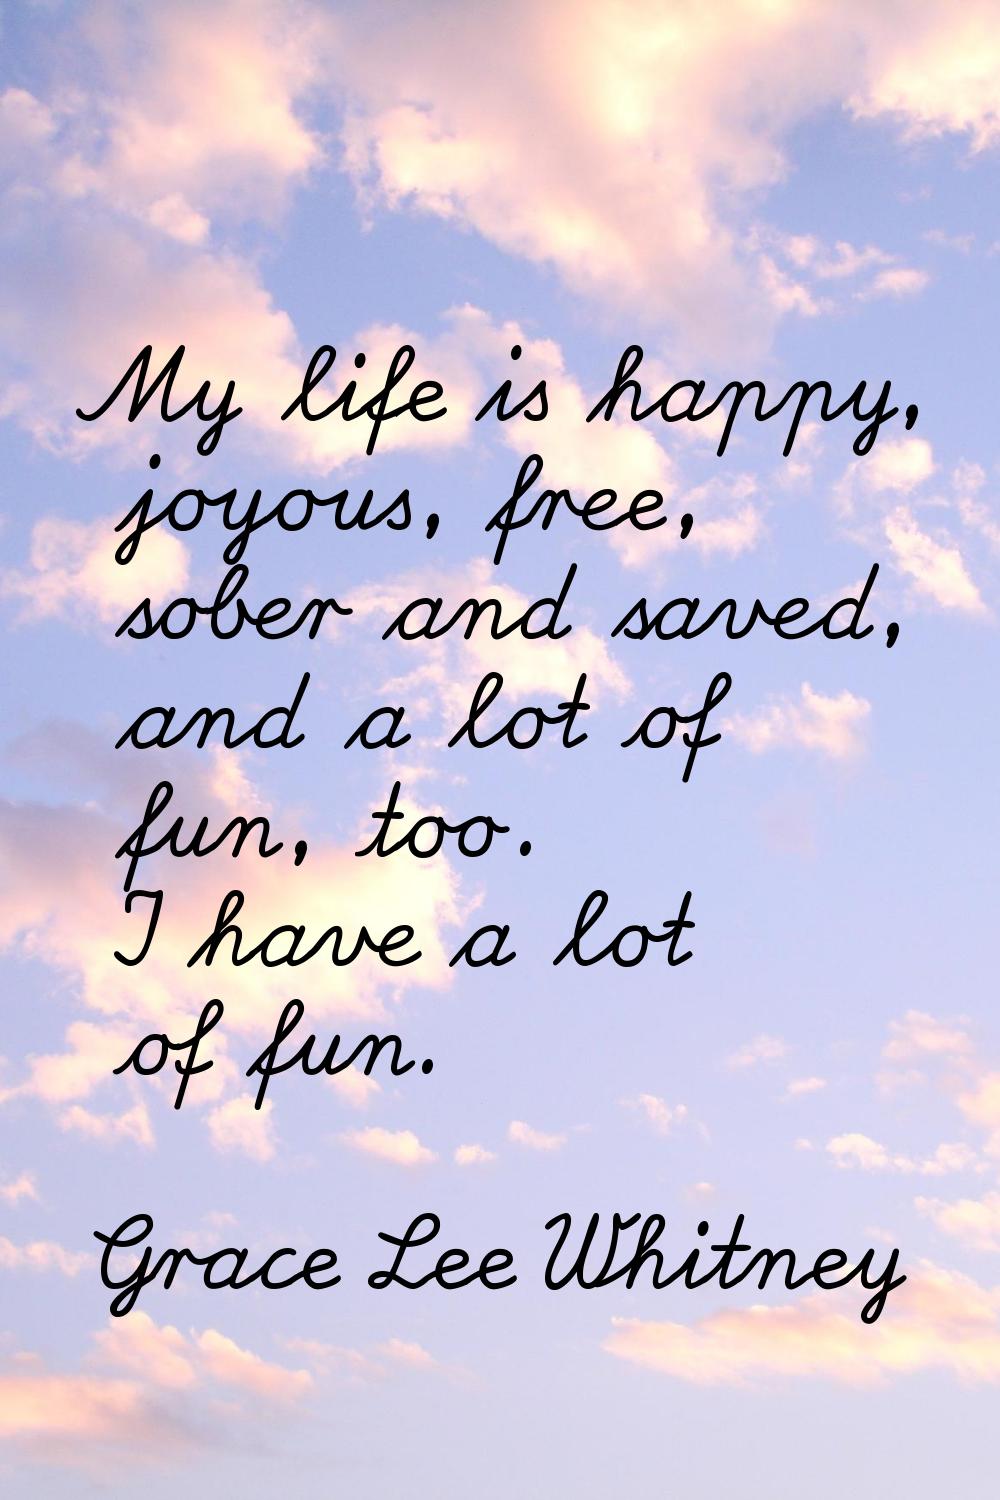 My life is happy, joyous, free, sober and saved, and a lot of fun, too. I have a lot of fun.